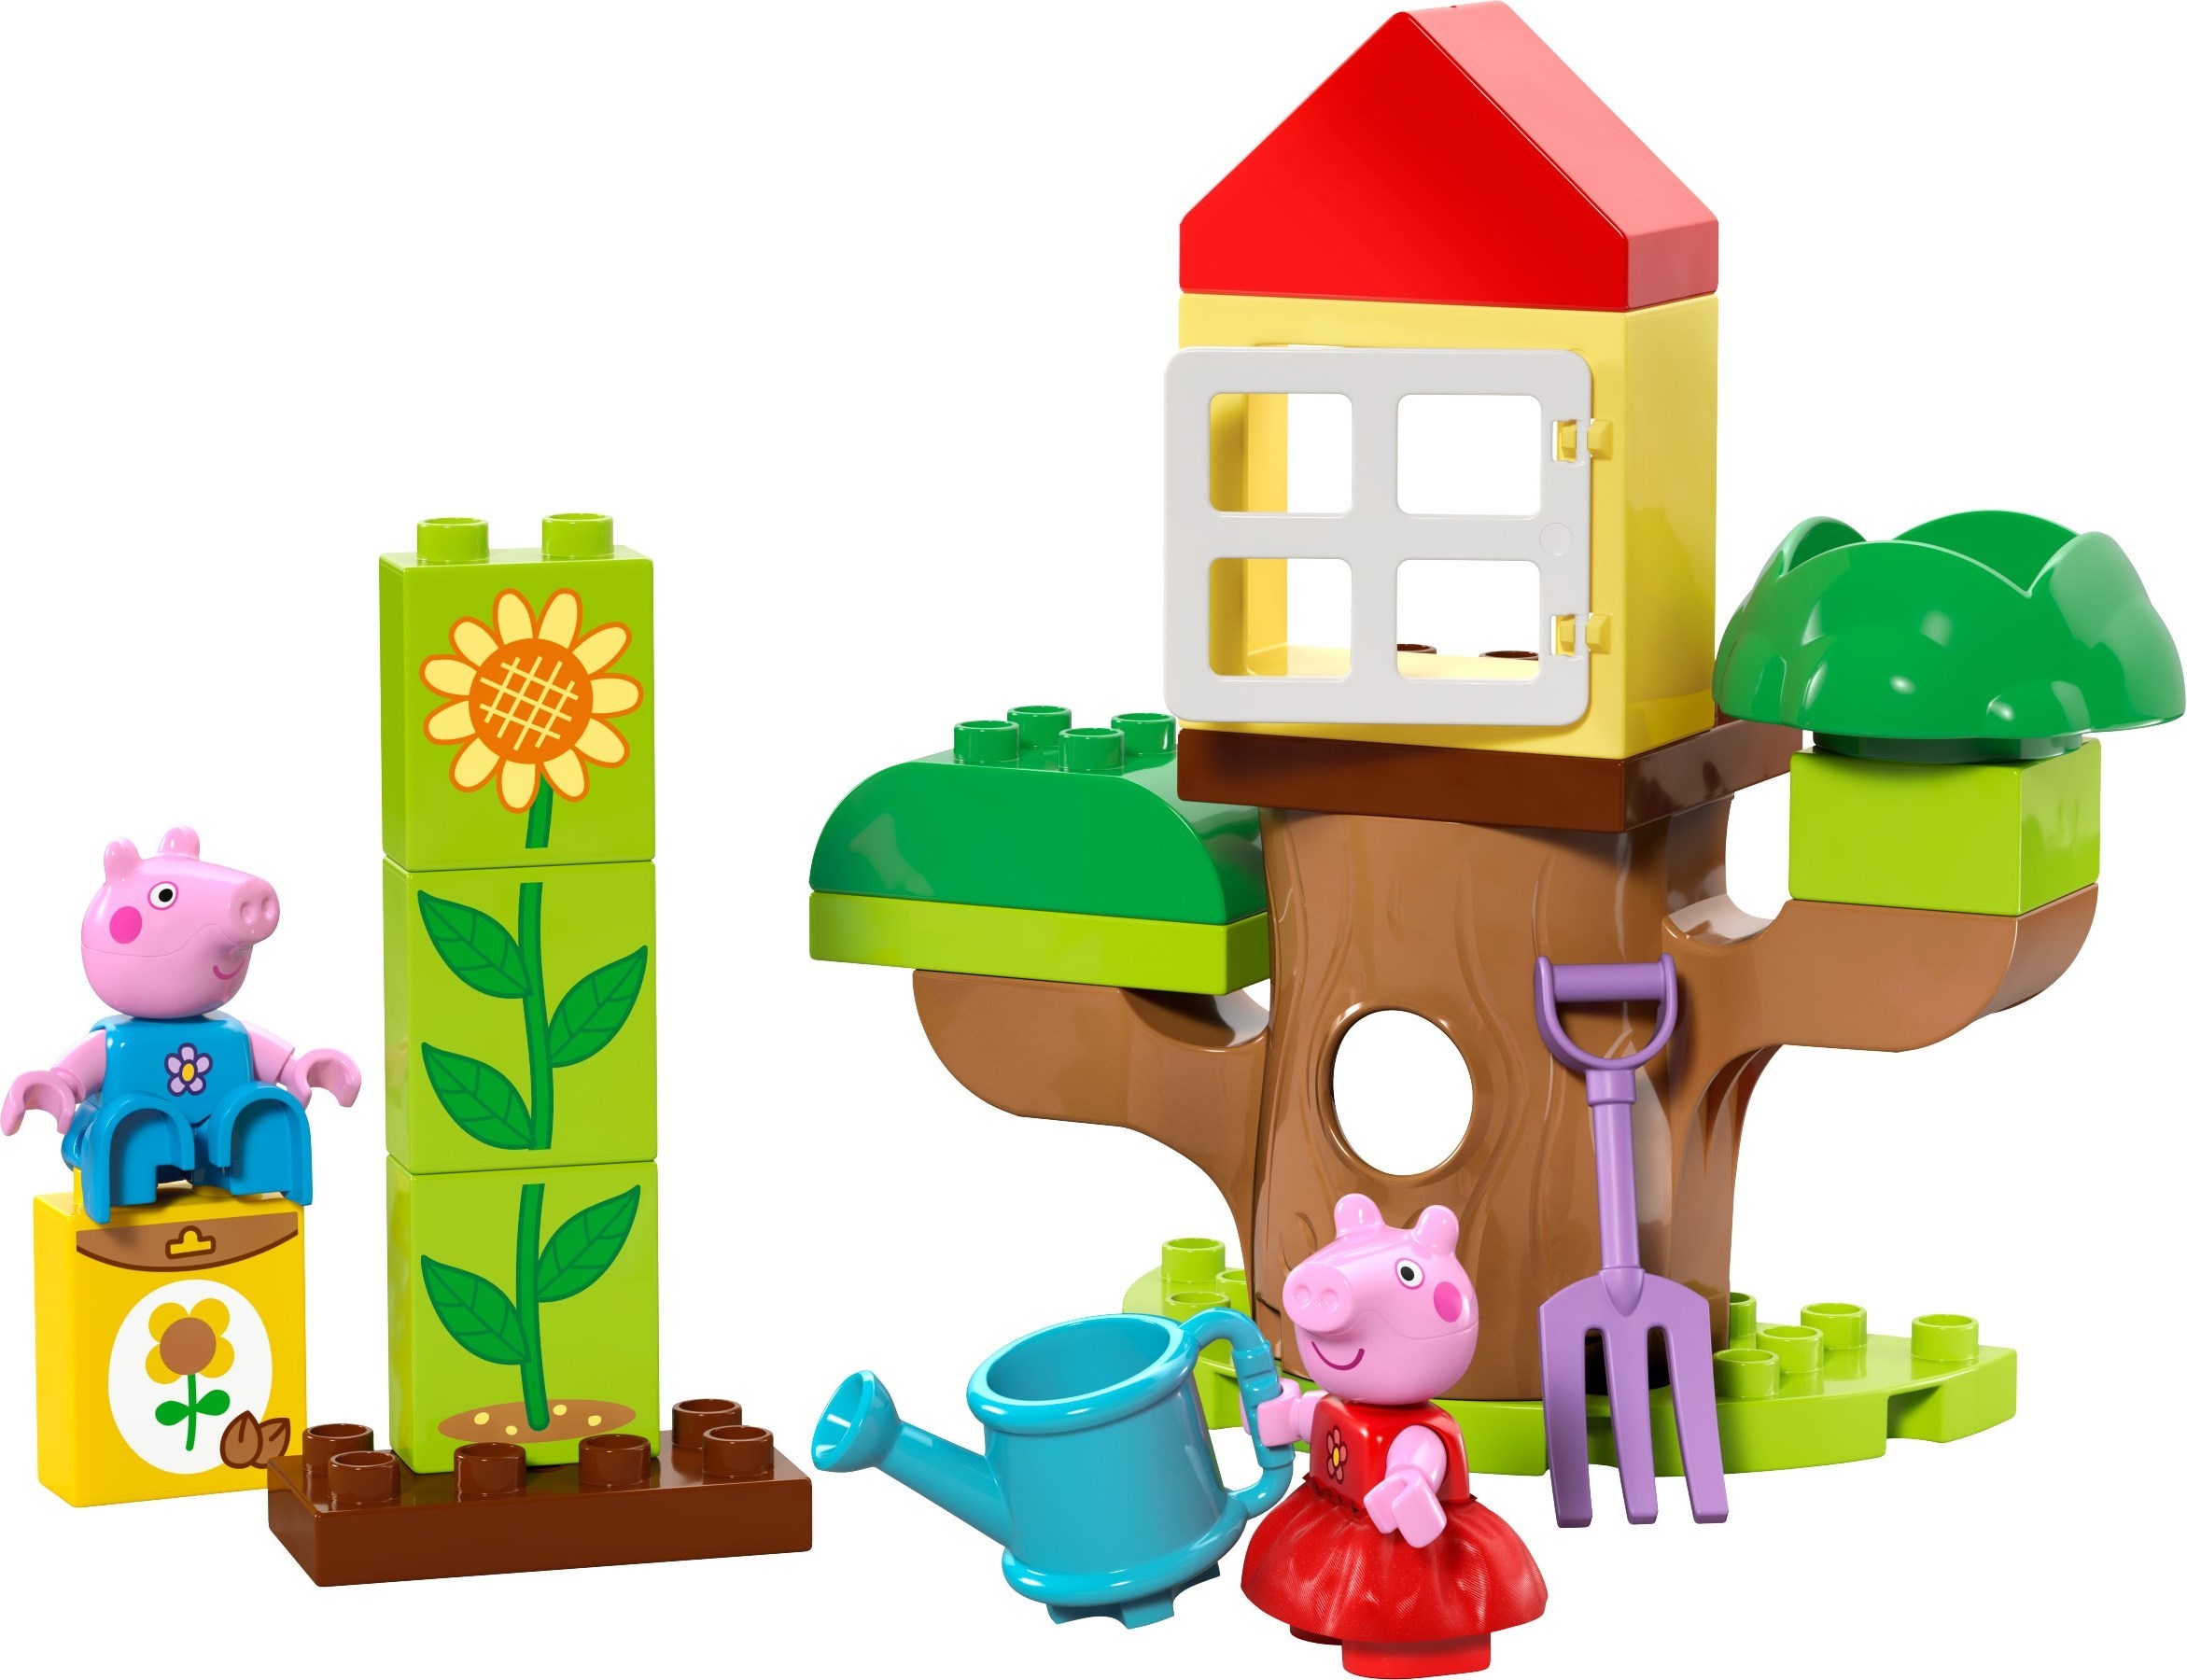 LEGO Peppa Pig Peppa Pig Garden And Tree House 10431 2